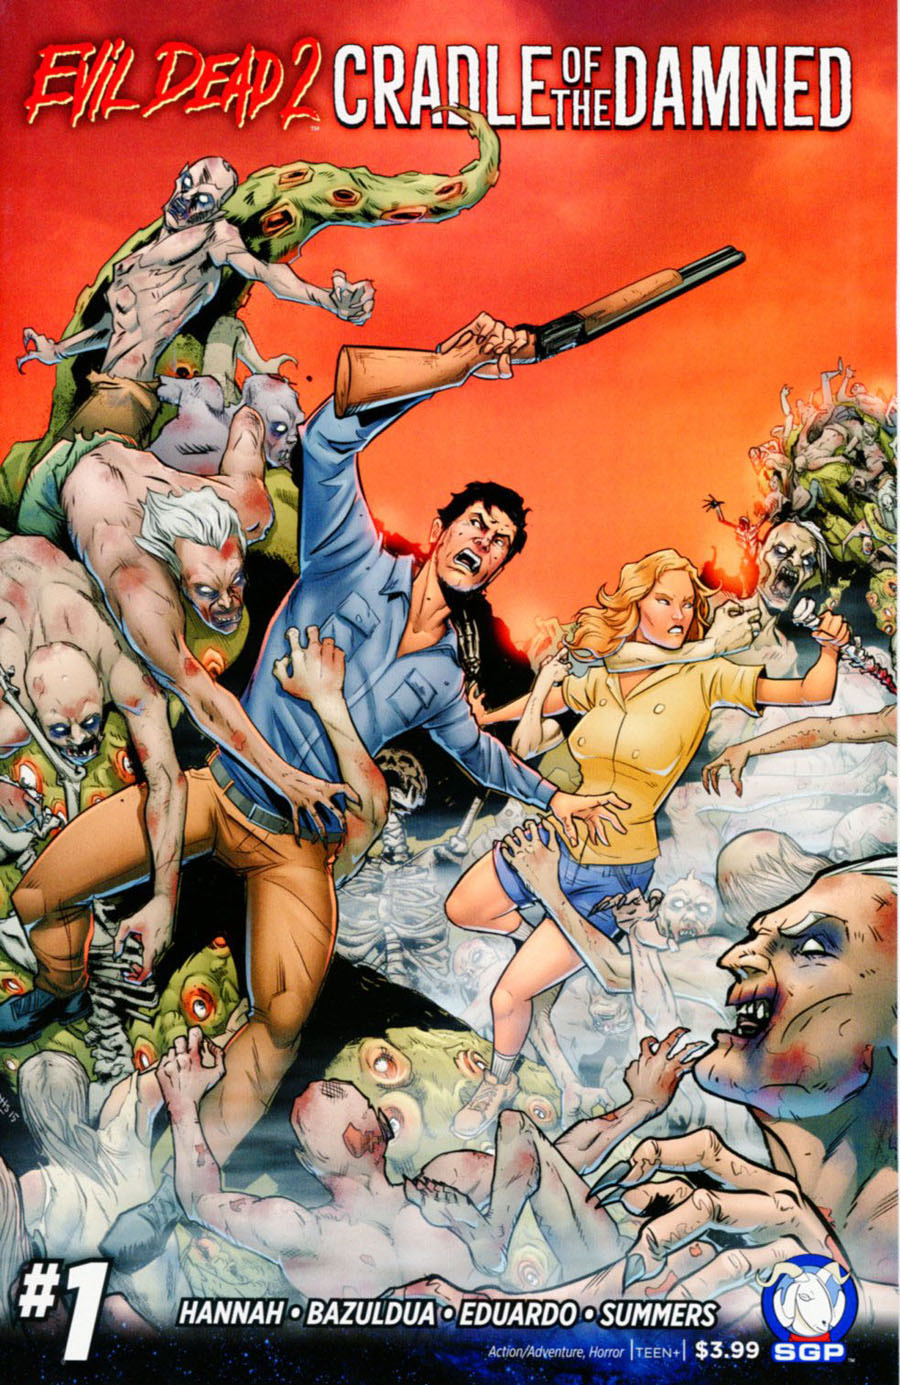 Evil Dead 2 Cradle Of The Damned #1 Cover A Regular Larry Watts Cover